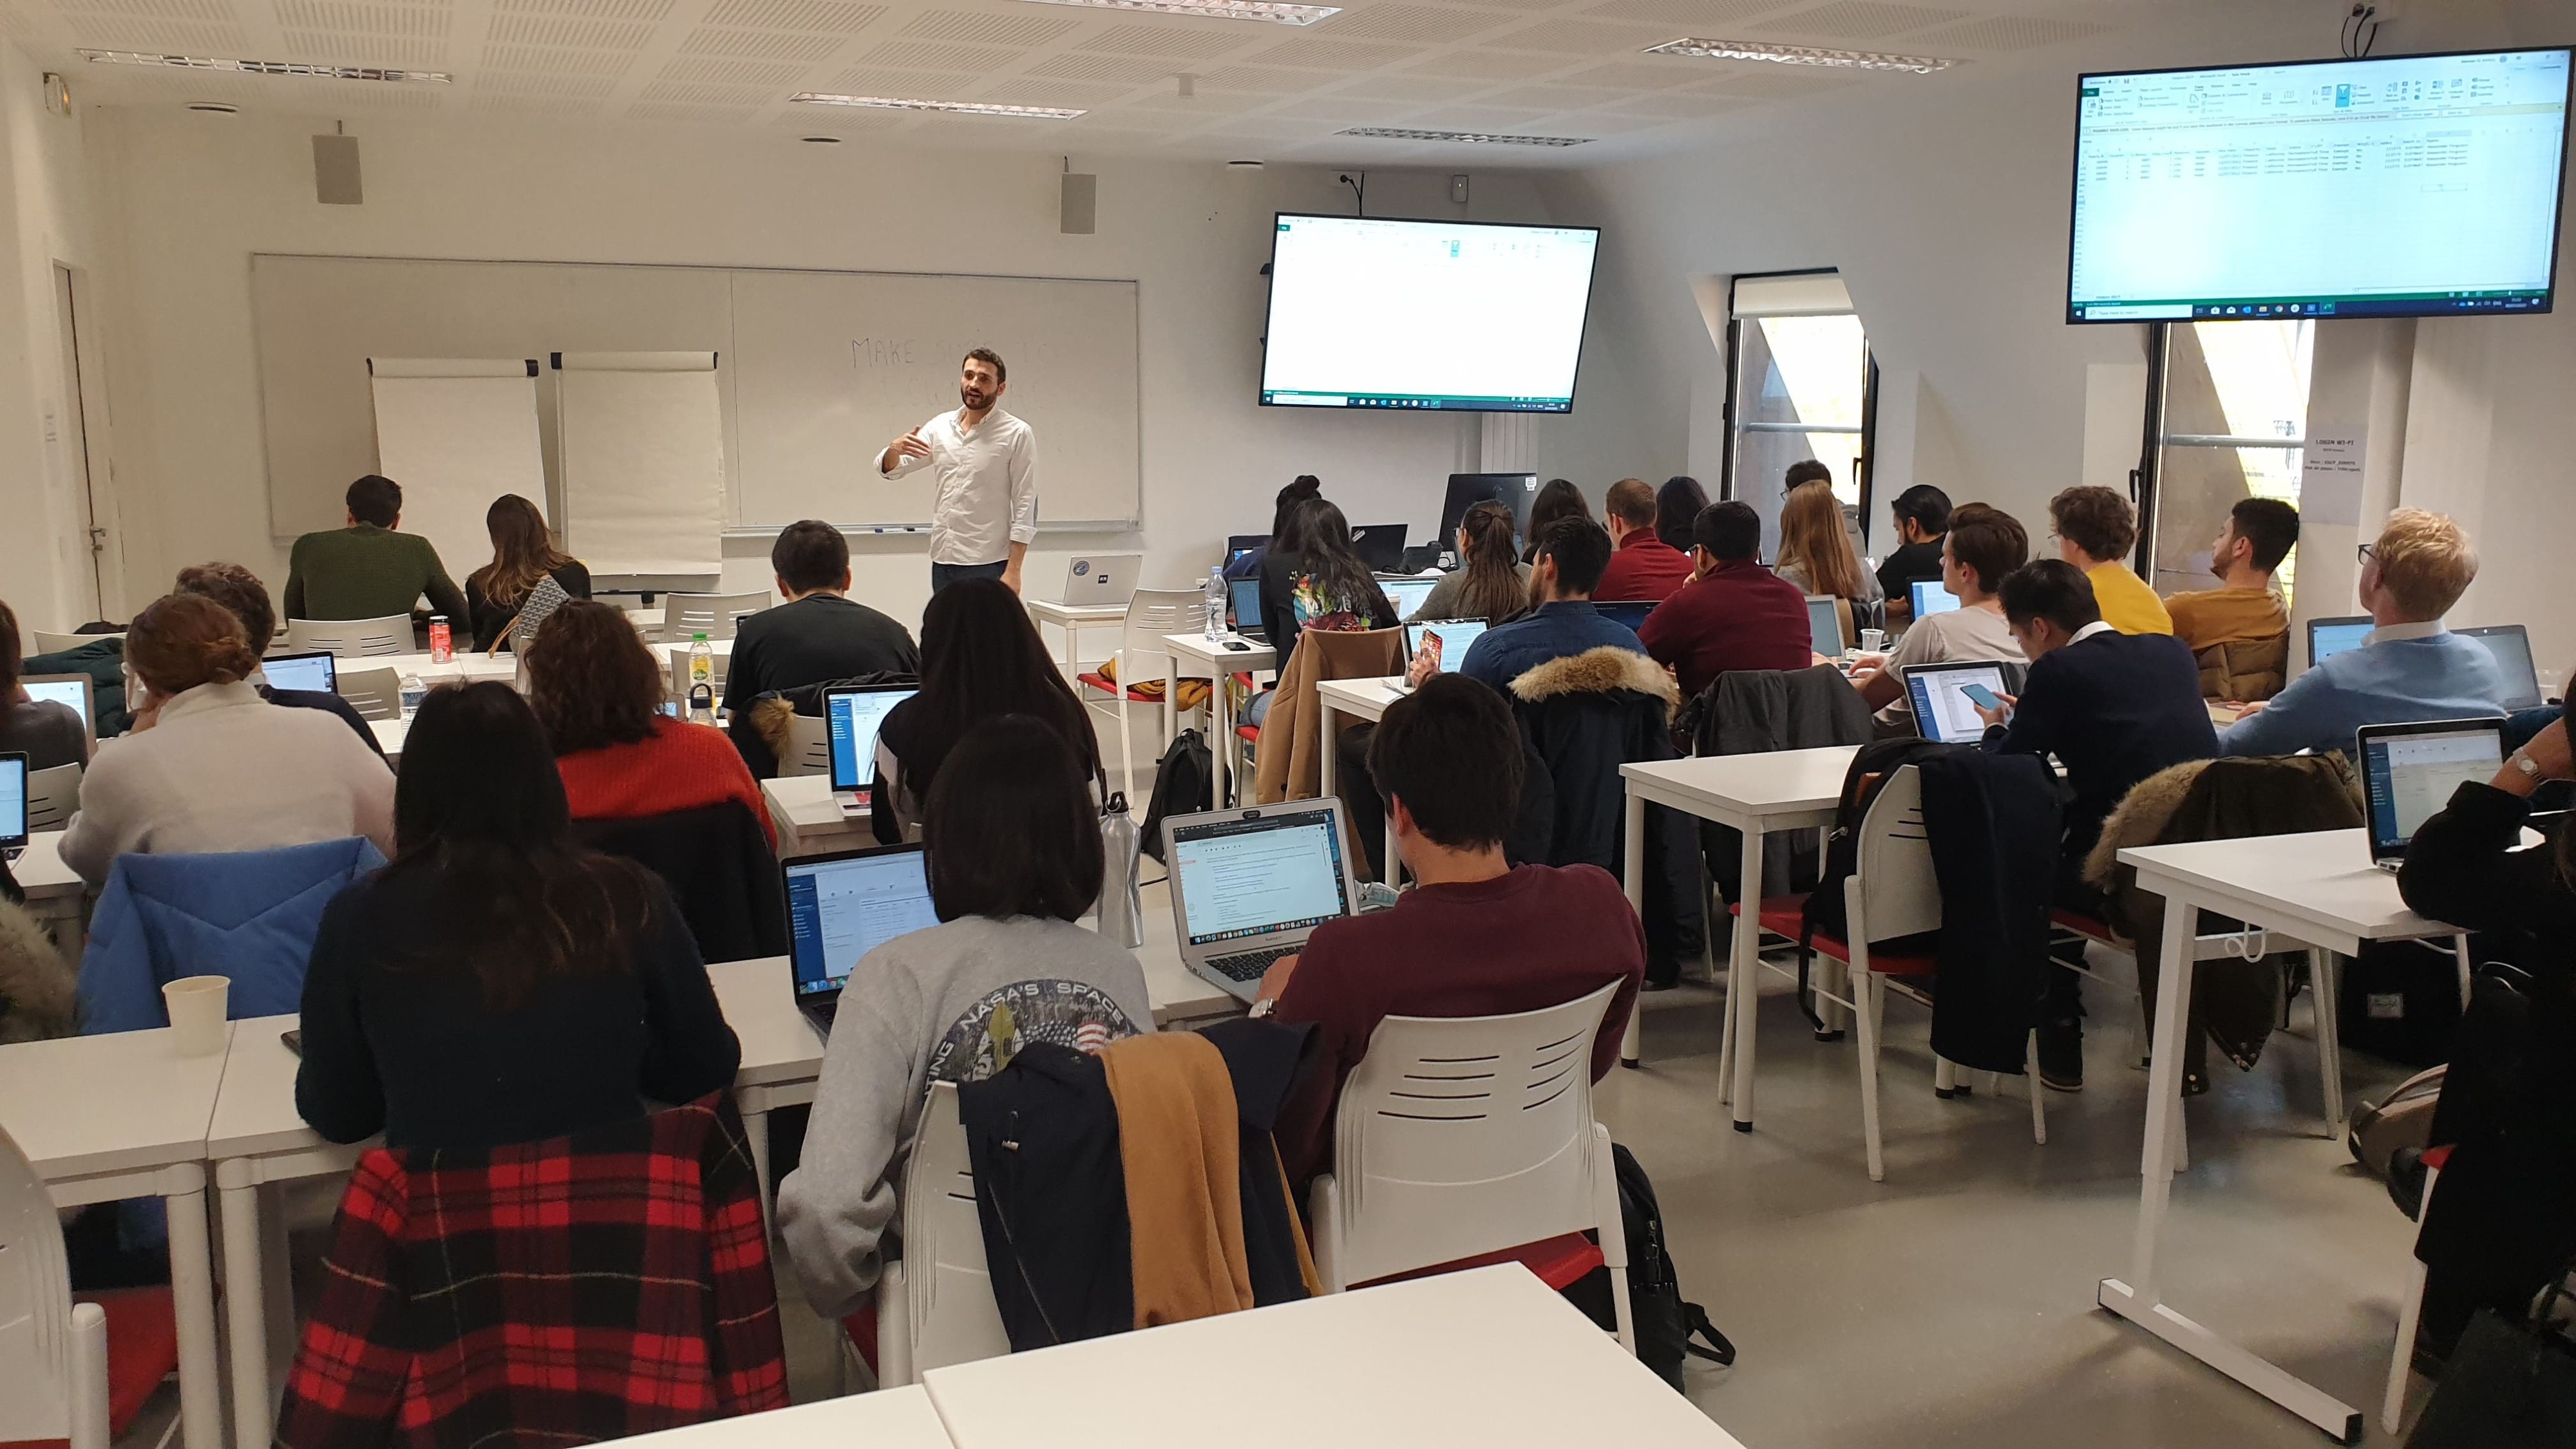 LAB32 TRAINS STUDENTS OF THE BIG DATA MSC FROM ESCP TO DATAVIZ